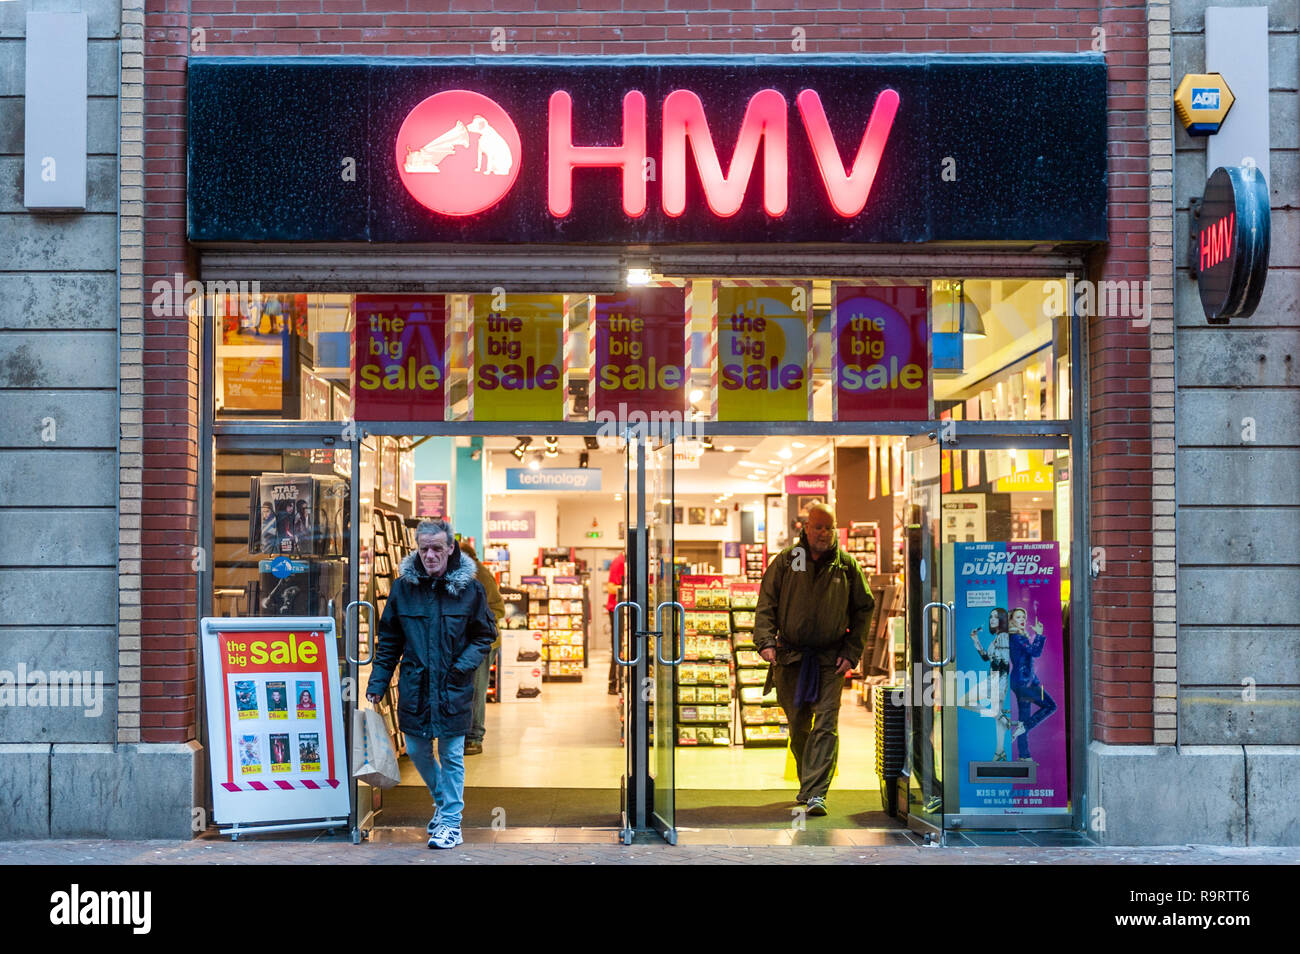 Blackpool, UK. 28th Dec, 2018. Shoppers leave HMV, Blackpool, as the national chain is facing administration this week, putting 2,200 jobs at risk. The chain, which operates 130 stores, has fallen victim of online streaming services. Credit: AG News/Alamy Live News Stock Photo